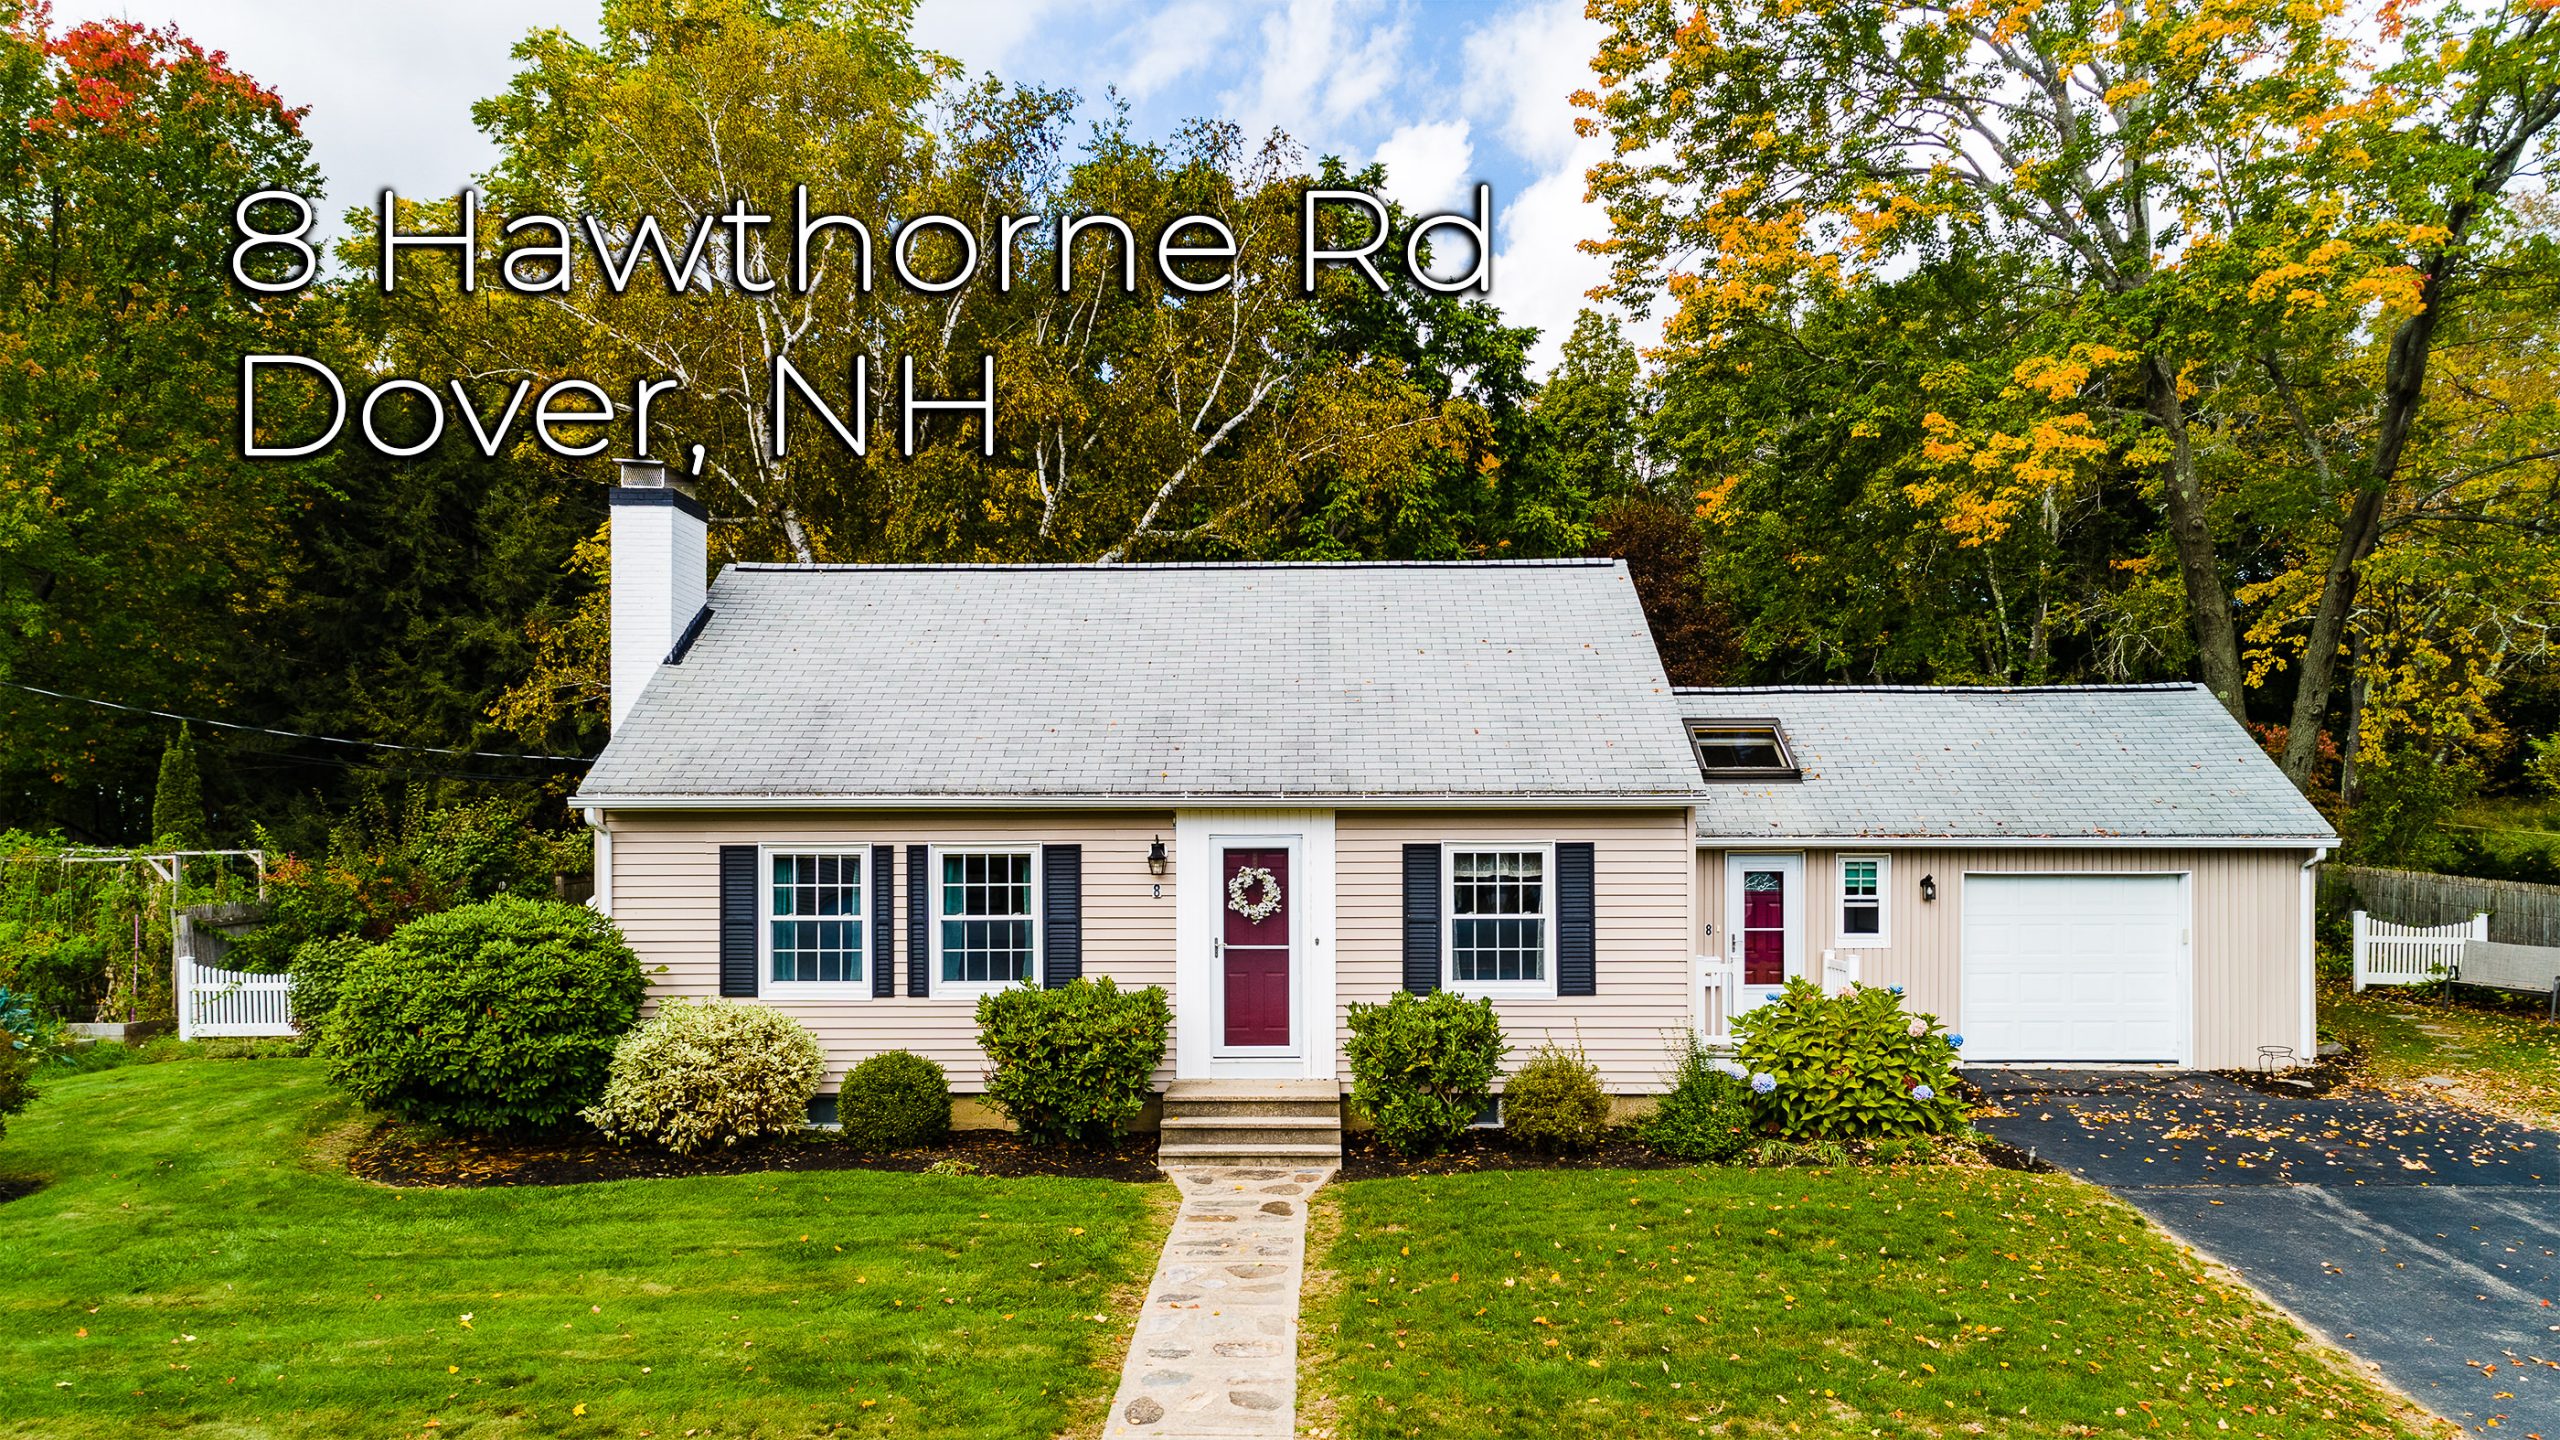 8 Hawthorne Rd Dover NH 03820